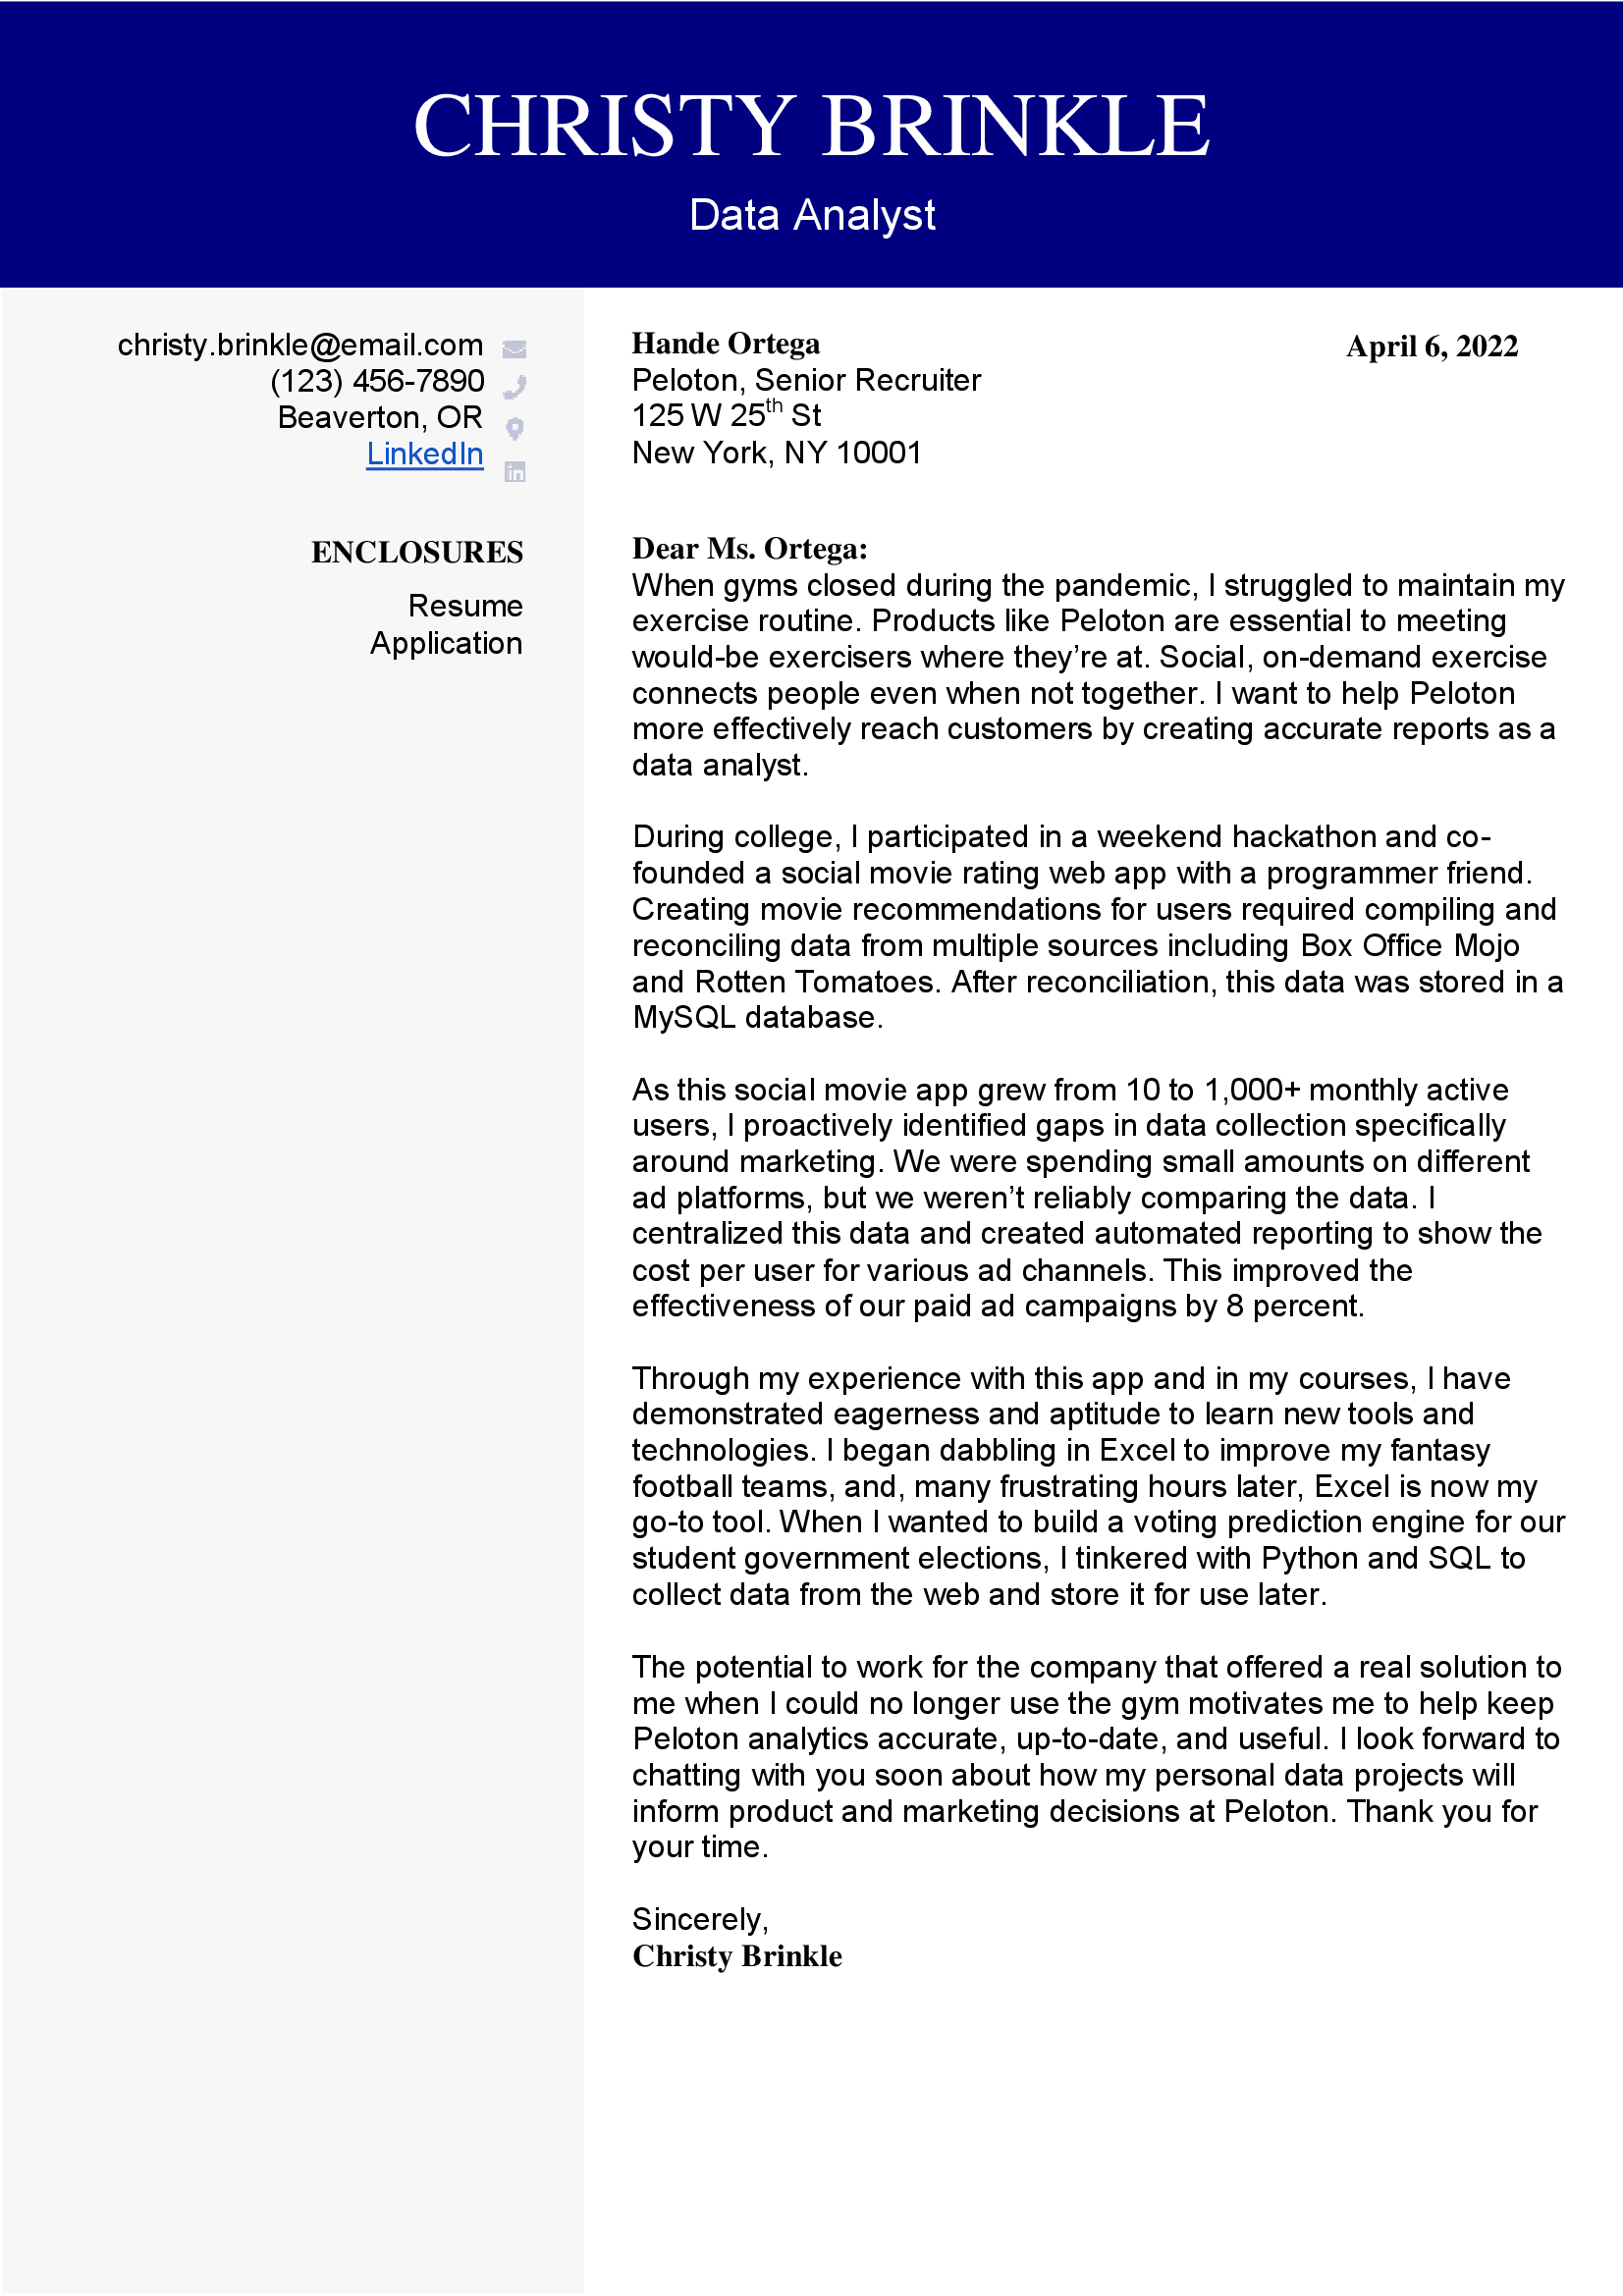 Data analyst cover letter with blue header